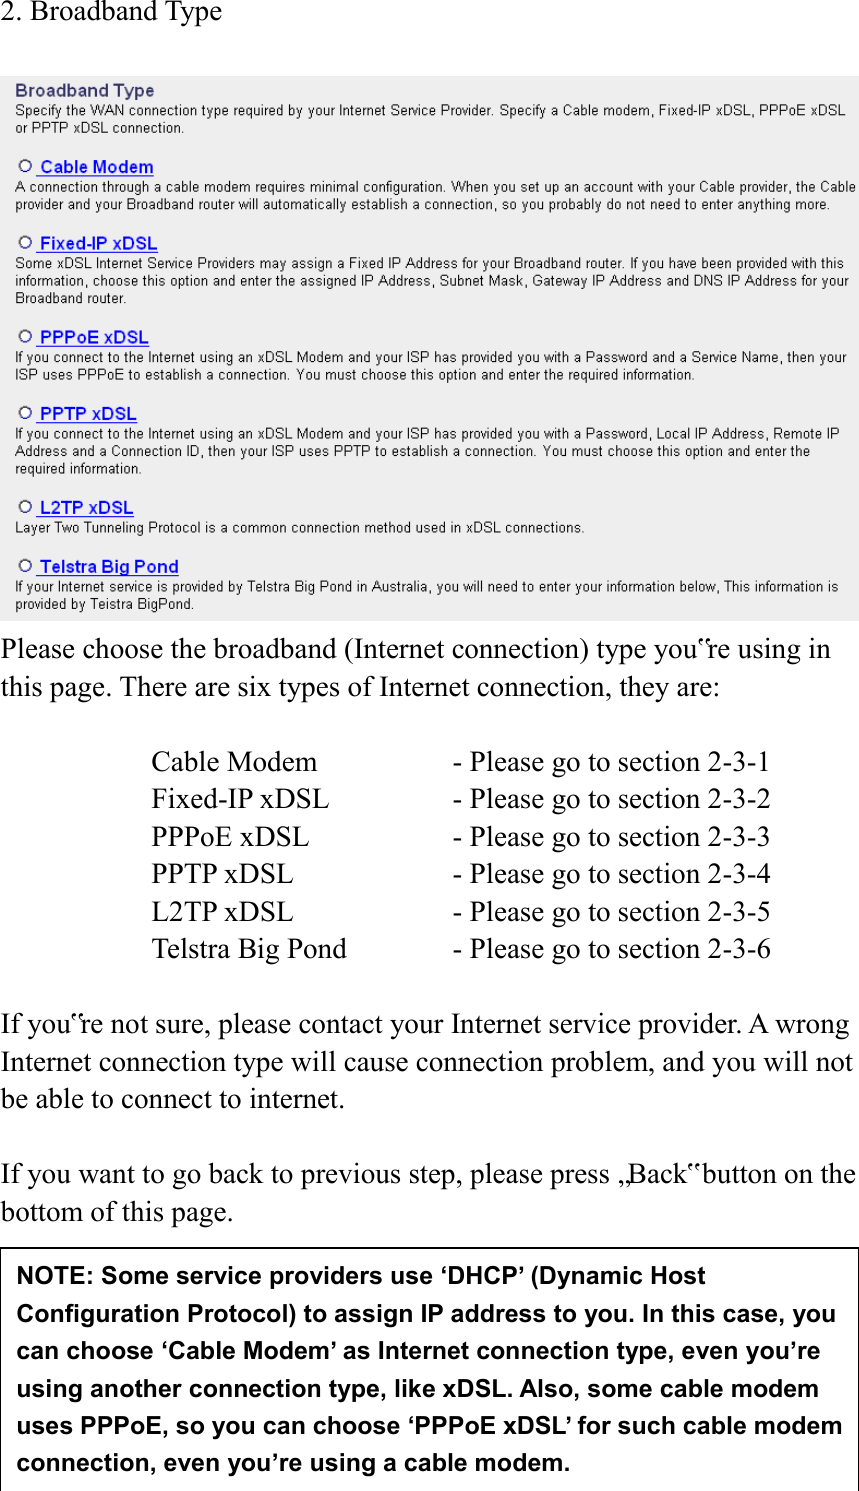  24 2. Broadband Type   Please choose the broadband (Internet connection) type you‟re using in this page. There are six types of Internet connection, they are:  Cable Modem      - Please go to section 2-3-1 Fixed-IP xDSL      - Please go to section 2-3-2 PPPoE xDSL      - Please go to section 2-3-3 PPTP xDSL       - Please go to section 2-3-4 L2TP xDSL       - Please go to section 2-3-5 Telstra Big Pond     - Please go to section 2-3-6  If you‟re not sure, please contact your Internet service provider. A wrong Internet connection type will cause connection problem, and you will not be able to connect to internet.  If you want to go back to previous step, please press „Back‟ button on the bottom of this page.      NOTE: Some service providers use ‘DHCP’ (Dynamic Host Configuration Protocol) to assign IP address to you. In this case, you can choose ‘Cable Modem’ as Internet connection type, even you’re using another connection type, like xDSL. Also, some cable modem uses PPPoE, so you can choose ‘PPPoE xDSL’ for such cable modem connection, even you’re using a cable modem. 